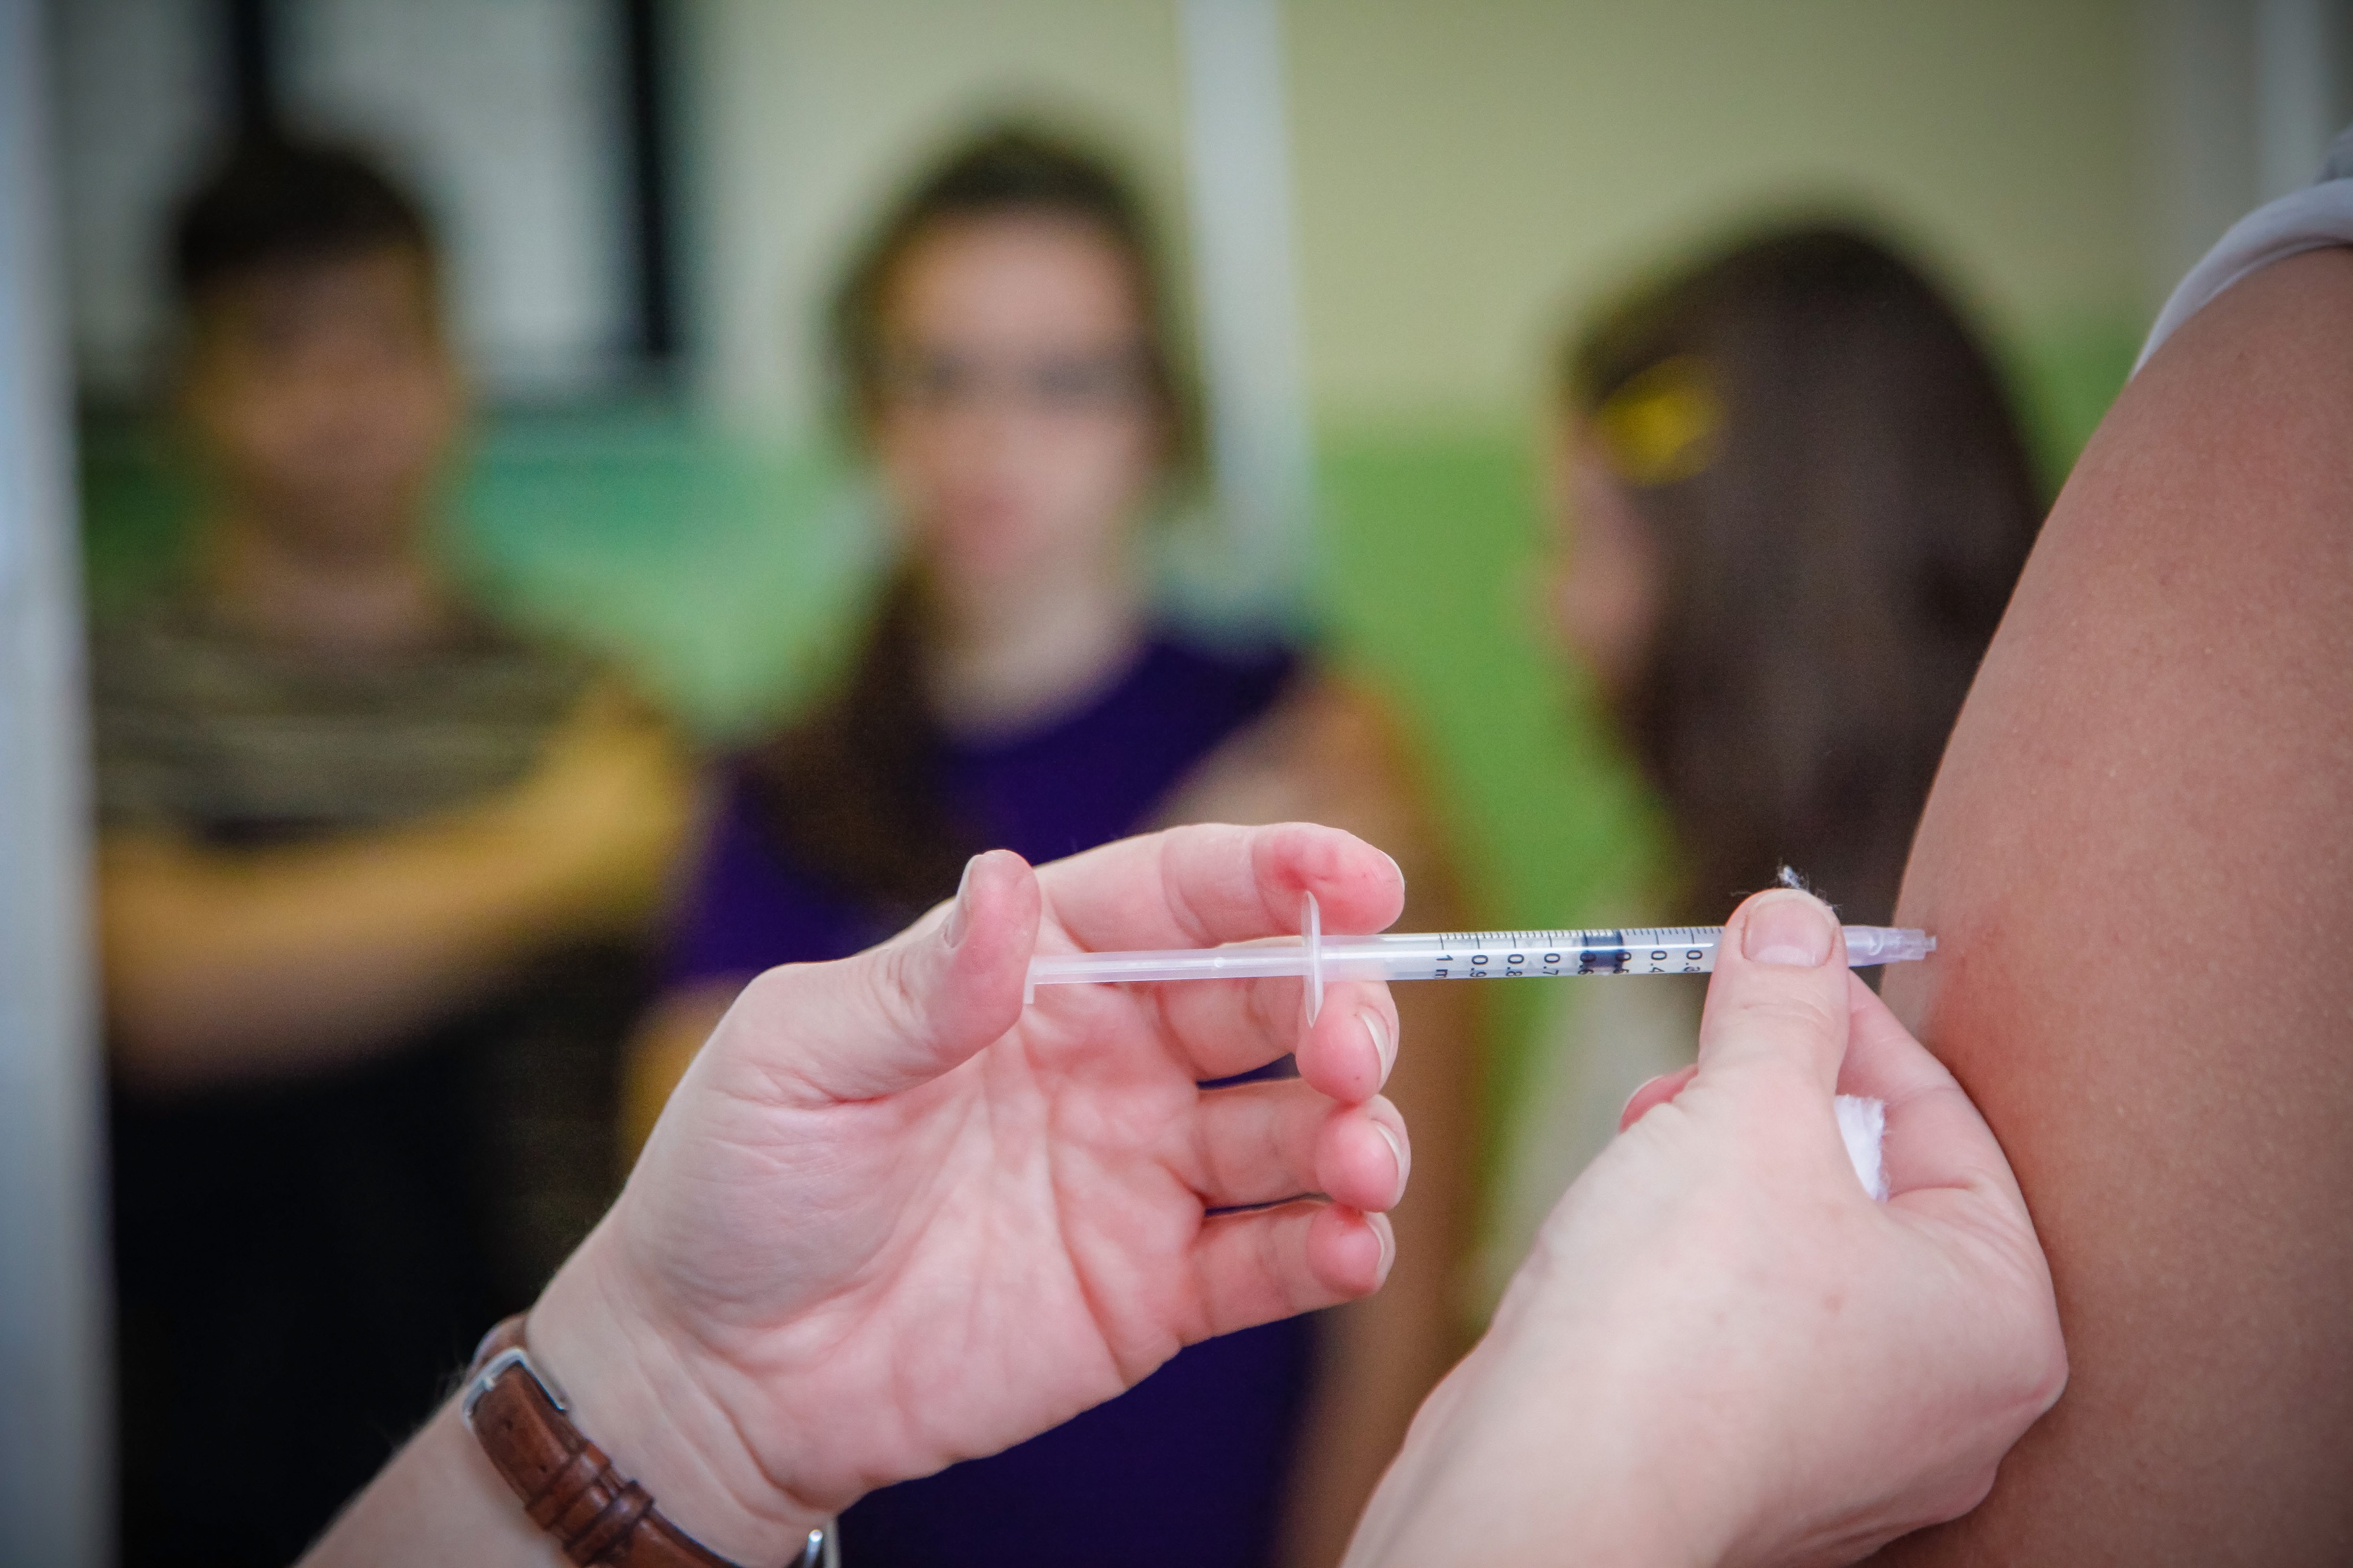 The Department of Health will administer the vaccinations at schools. Photo: Shutterstock